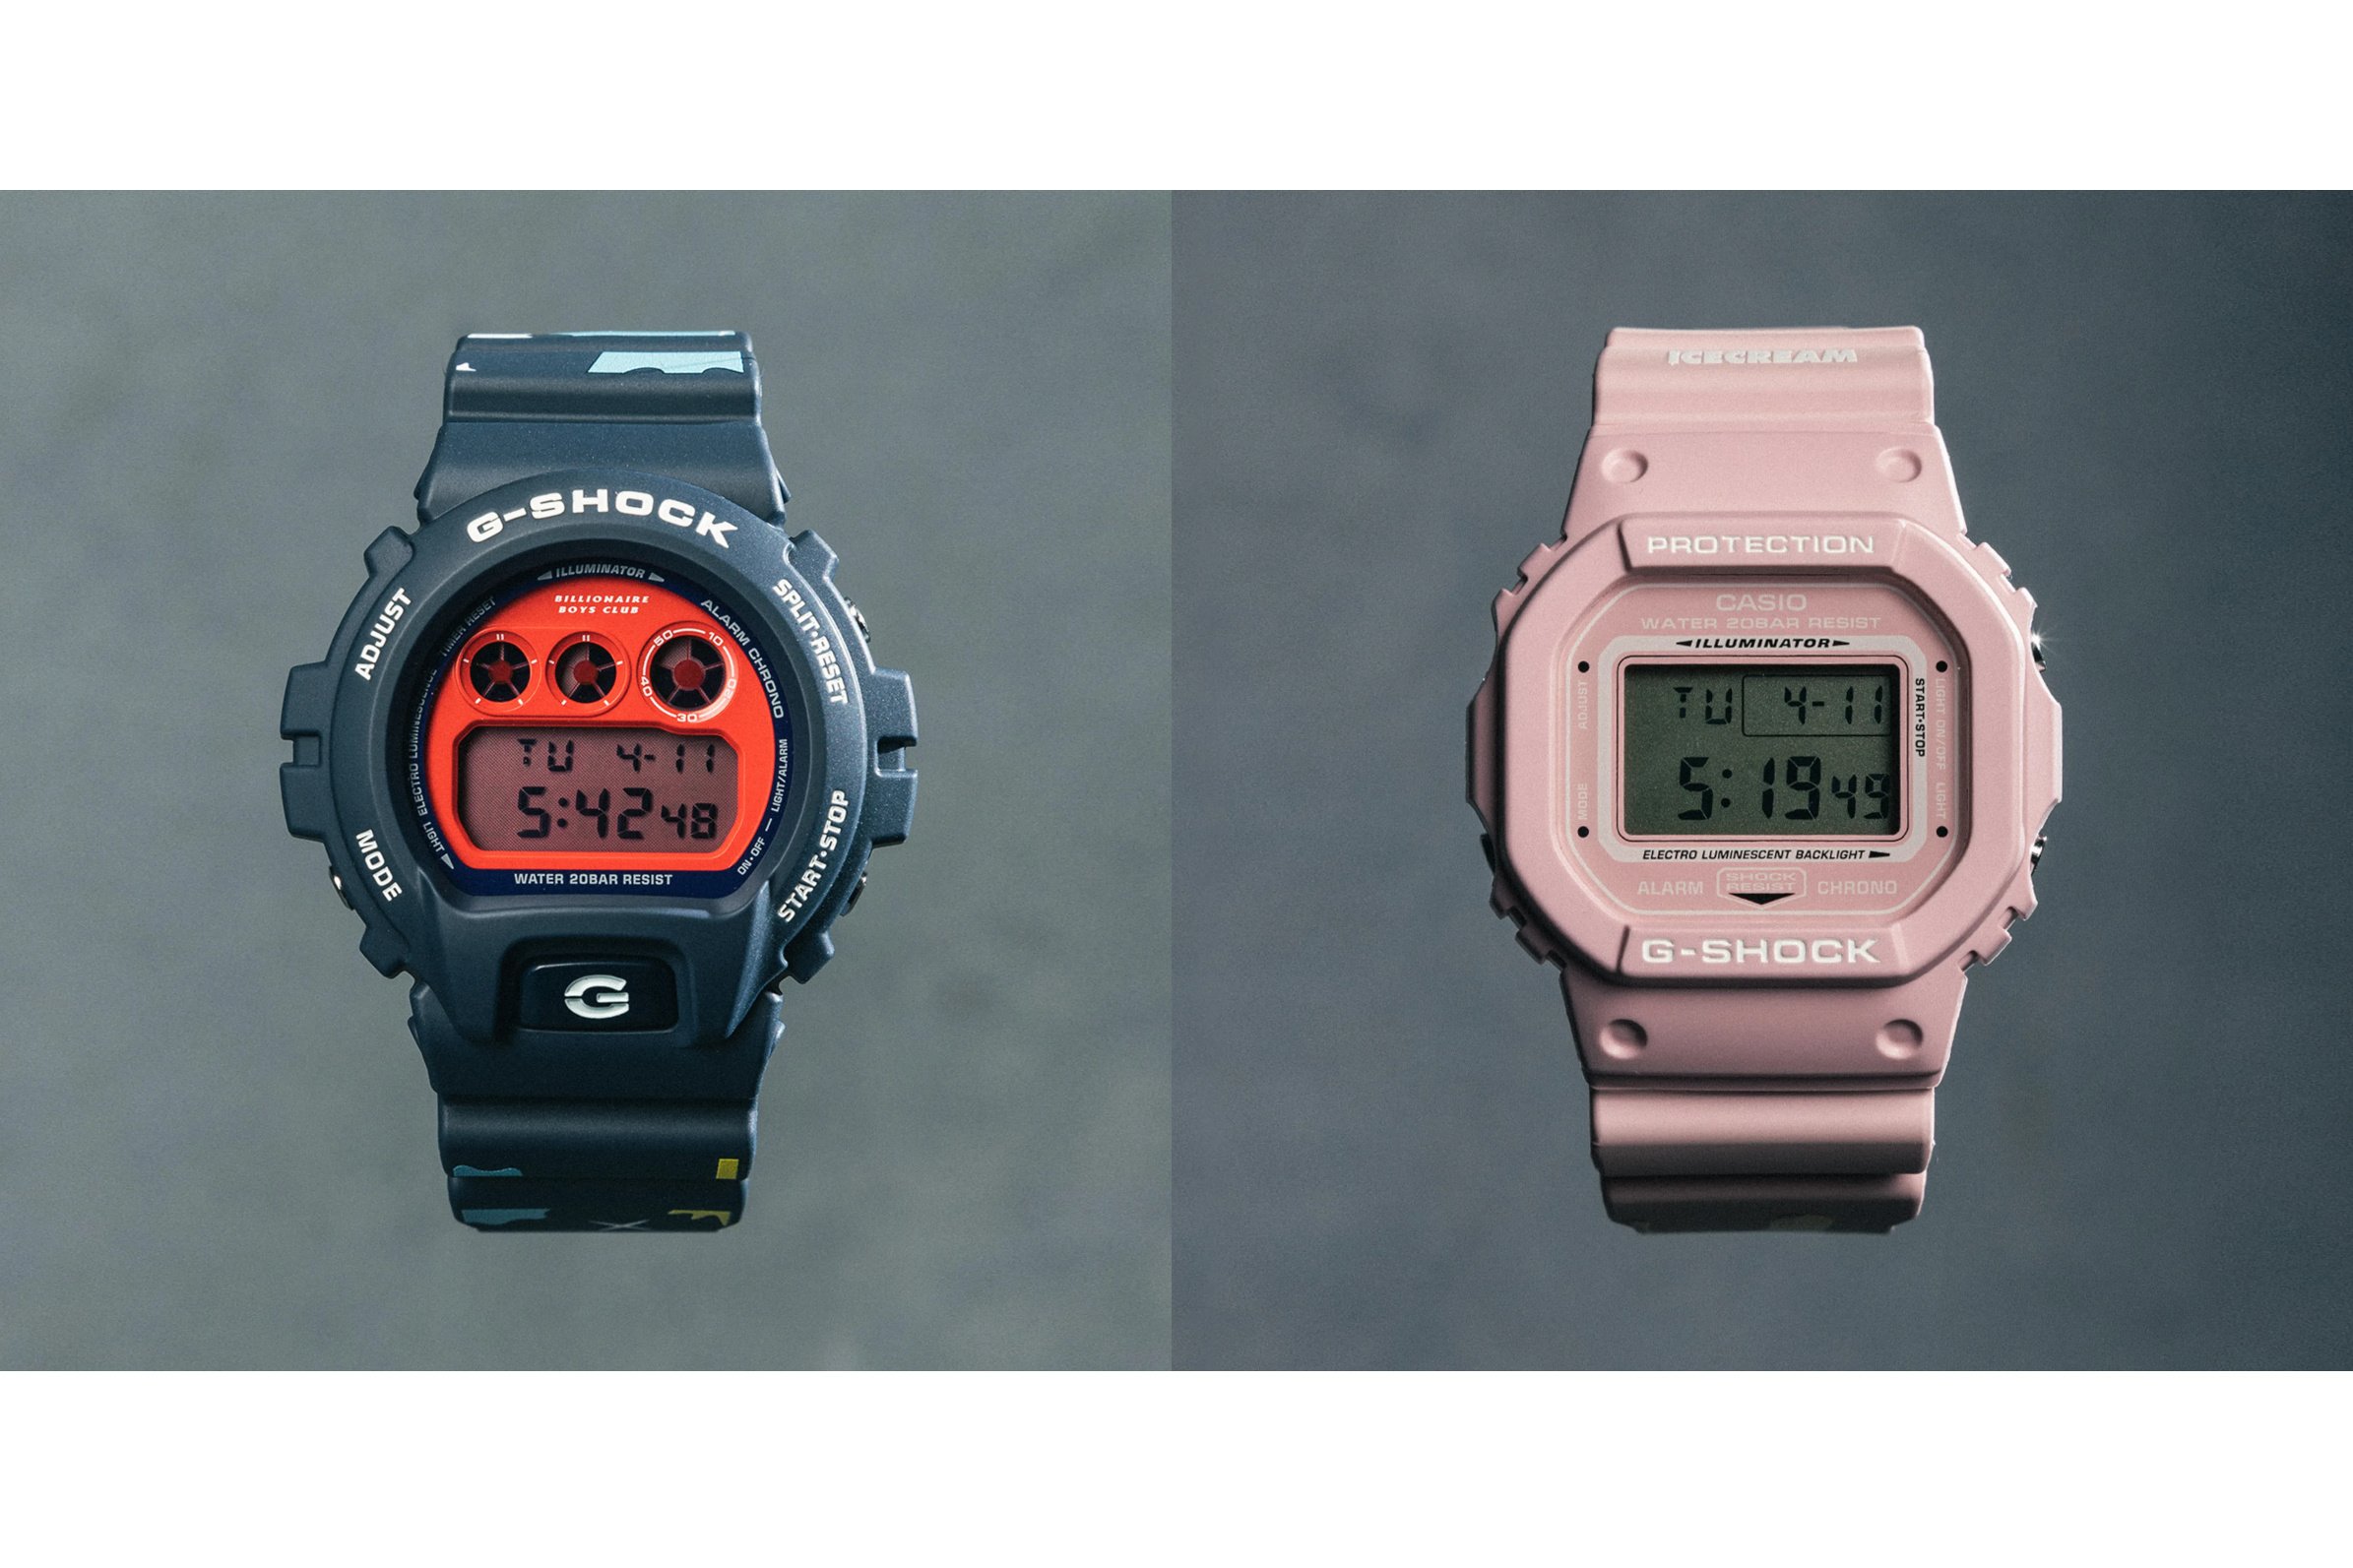 Billionaire Boys Club and Icecream G-Shock collaborations coming June 16, with 6/15 NYC launch event